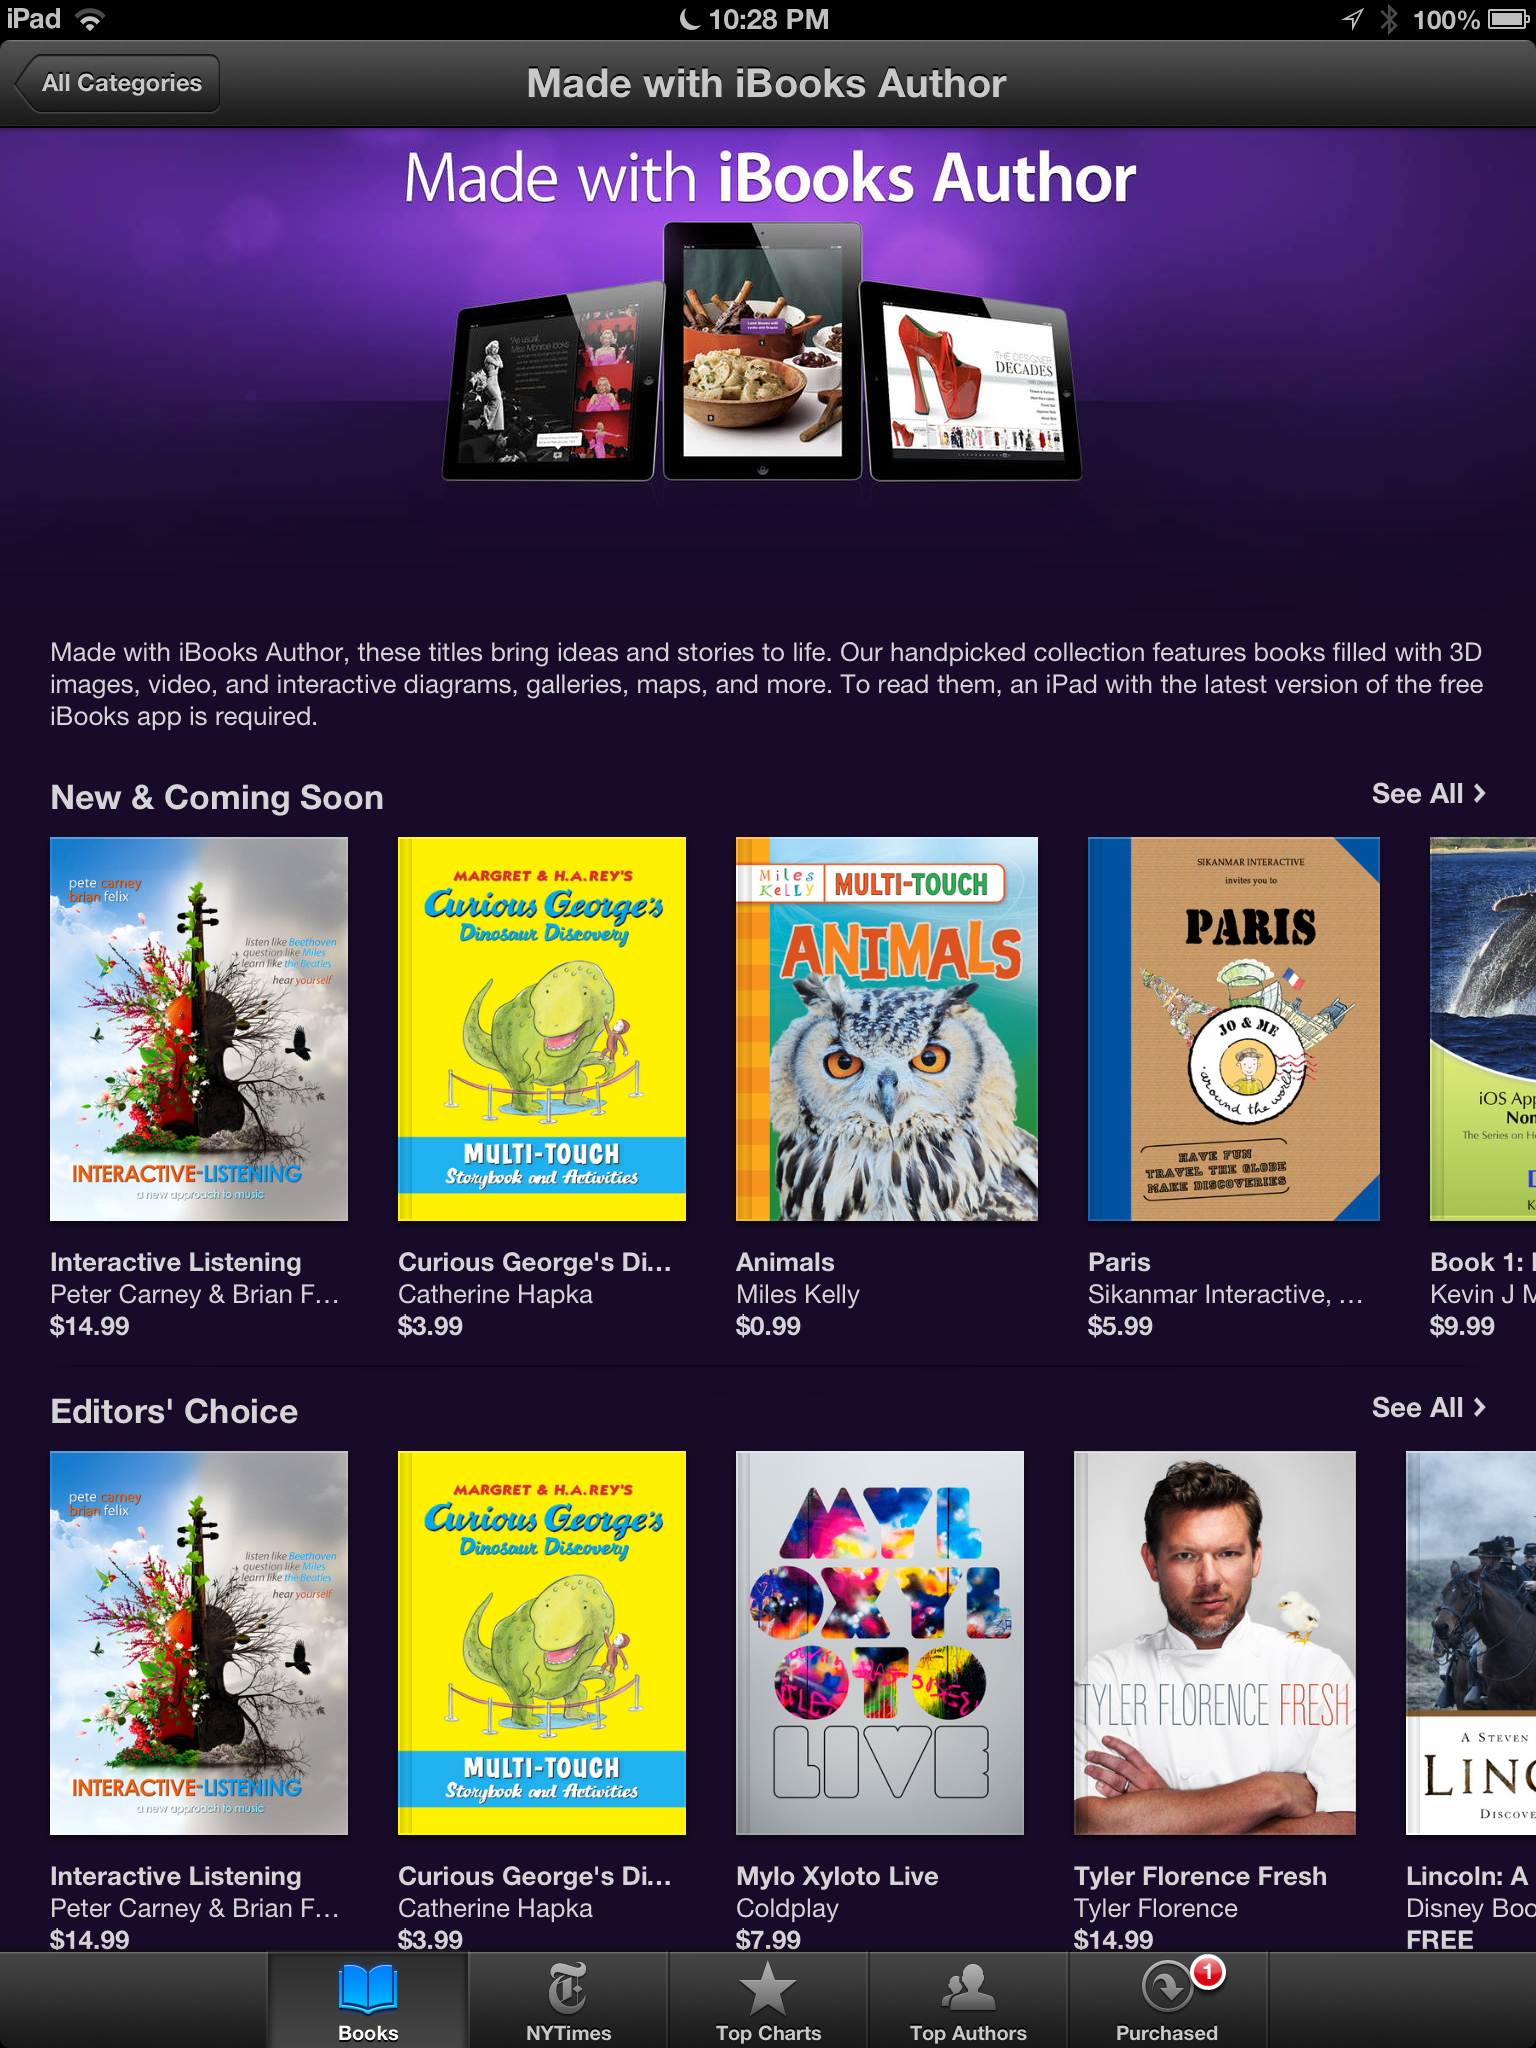 music education and music appreciation dominate interactive textbooks on iPad